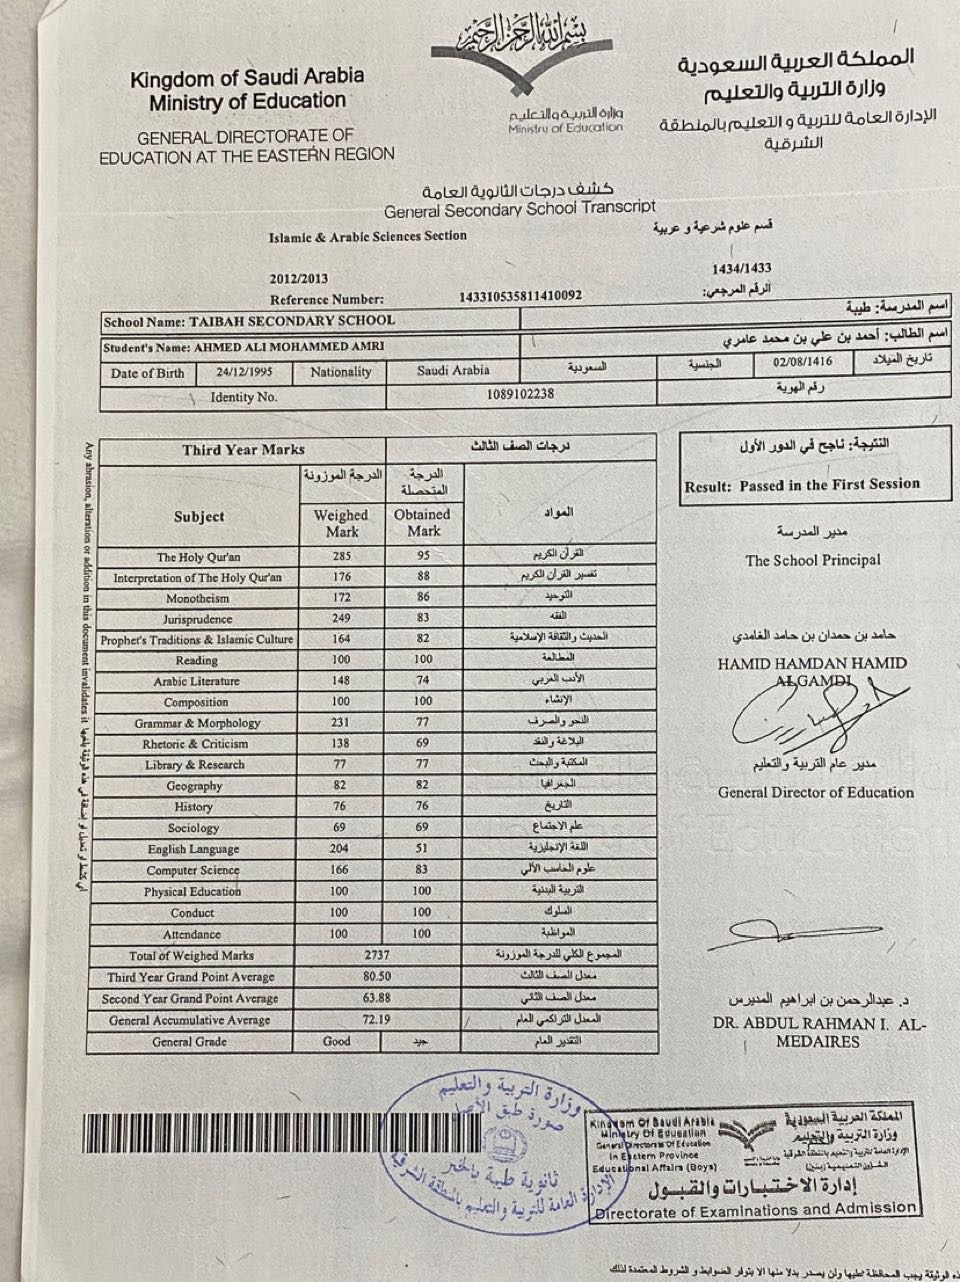 Qag2uul Quel A5loo)!

 

of Saudi Arabia
Ministry of Education (ogl=elig aul 6)l)9
GENERAL DIRECTORATE OF Adhloloulail § QU AoleA oo)!
EDUCATION AT THE EASTERN REGION Le
Qala Ag ilo Lal
Genural Secondary School Transcript

Loamic & Arable Sciences Section Lup ip pre ed

20122013 14341433

Reference Nomber: 143319535811410092 sedated pa y
3 Lo he ph ped

   

 

 

[Schost Name: TAIBAH SECONDARY SCHOOL
—
(Stedents Nome: ARMED ALI MORAMMED AMKI

 

 

 

 

 

    
 
 
 
 
 
  
   
   

 

Duel Bed | 121m oa
l | Idemty No 1389102238 | Aw
[ Third Year Marks XB ad hp

 

The School Priacipal

 

$43 dd ram phe
HAMID BAMDAN HAMID
MERRY \
Cs
ads 2 pa pee
General Director of Education

 

 

 

 

 

 

 

Dad pad Gr pan Jae a
DR. ABDUL RAHMAN. AL-

 
   

oo Wk bes
nil RW

Jomdly Dy lui> 313503)

   

nd by 0 pnd pe We Vy ng at Aad my £4